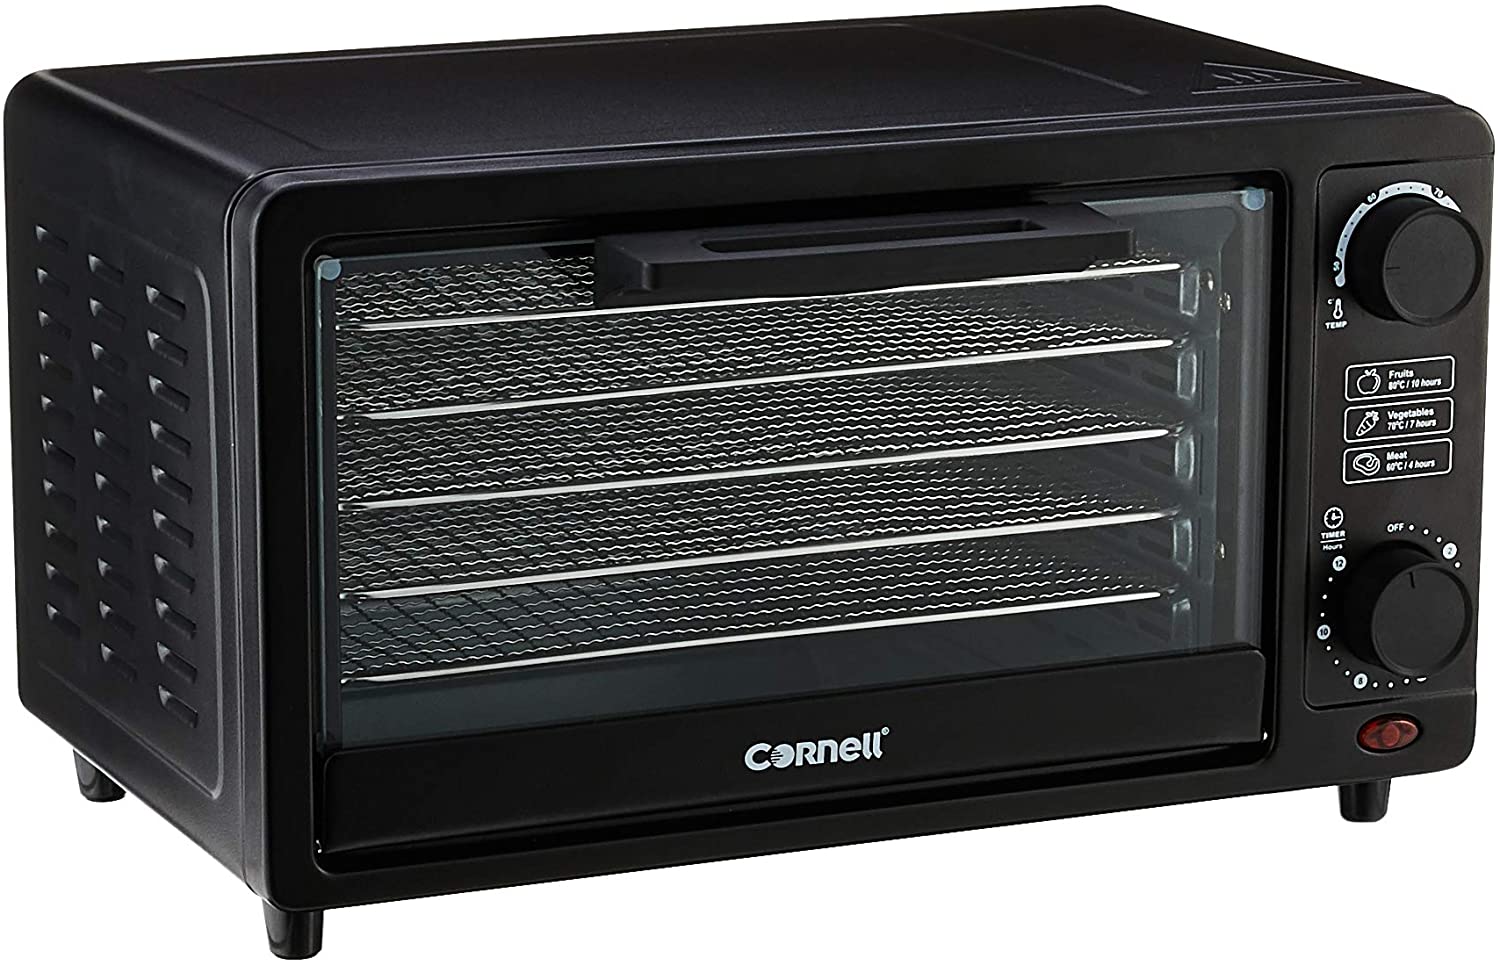 Cornell 14L Food Dehydrator is The 10 Best Food Dehydrators for 2021 2022 2023 Reviews,What is the Best Food Dehydrator for Home Use in Singapore?, What should I look for when buying a food dehydrator?,What is a good inexpensive food dehydrator?,Best food dehydrator Consumer reports, What kind of dehydrator should I buy?,What are the best foods to dehydrate?,What is the best food dehydrator on the market today?,How do I choose a food dehydrator?,Are food dehydrators worth it?,What are the best foods to dehydrate?, Best Food Dehydrators Reviews and Buying Guide, Best food dehydrators for herbs fruit and more food,The 10 Best Food Dehydrators for 2021 2022 2023 Reviews